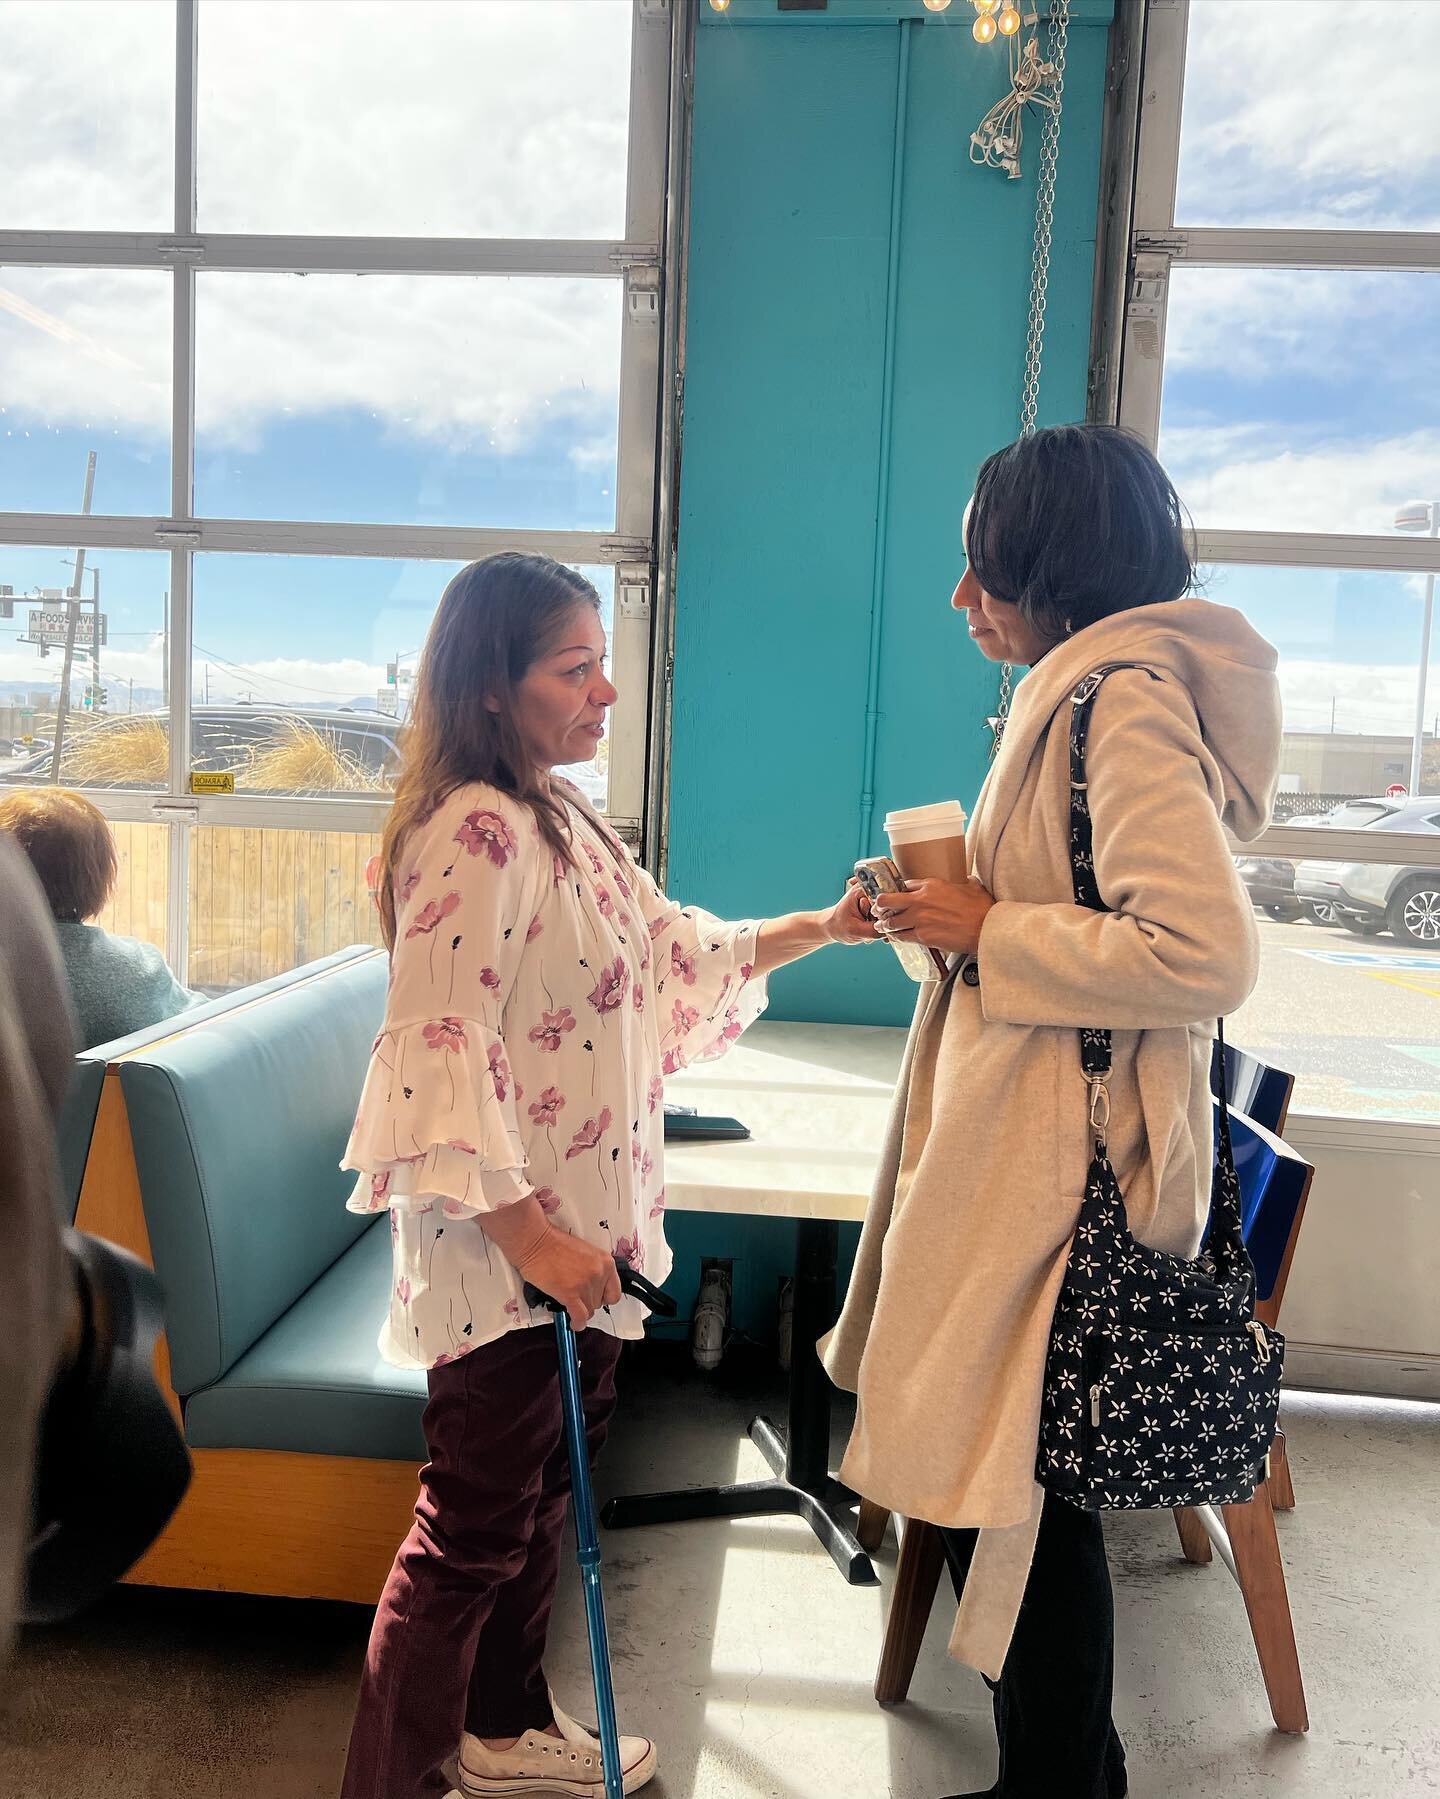 Today, I met with Tammy, an unhoused woman who asked to meet with me before she voted. She told me her story and wants me to share it &mdash; that one-size-all policies and temporary housing are not serving our unhoused neighbors. All she wants is to